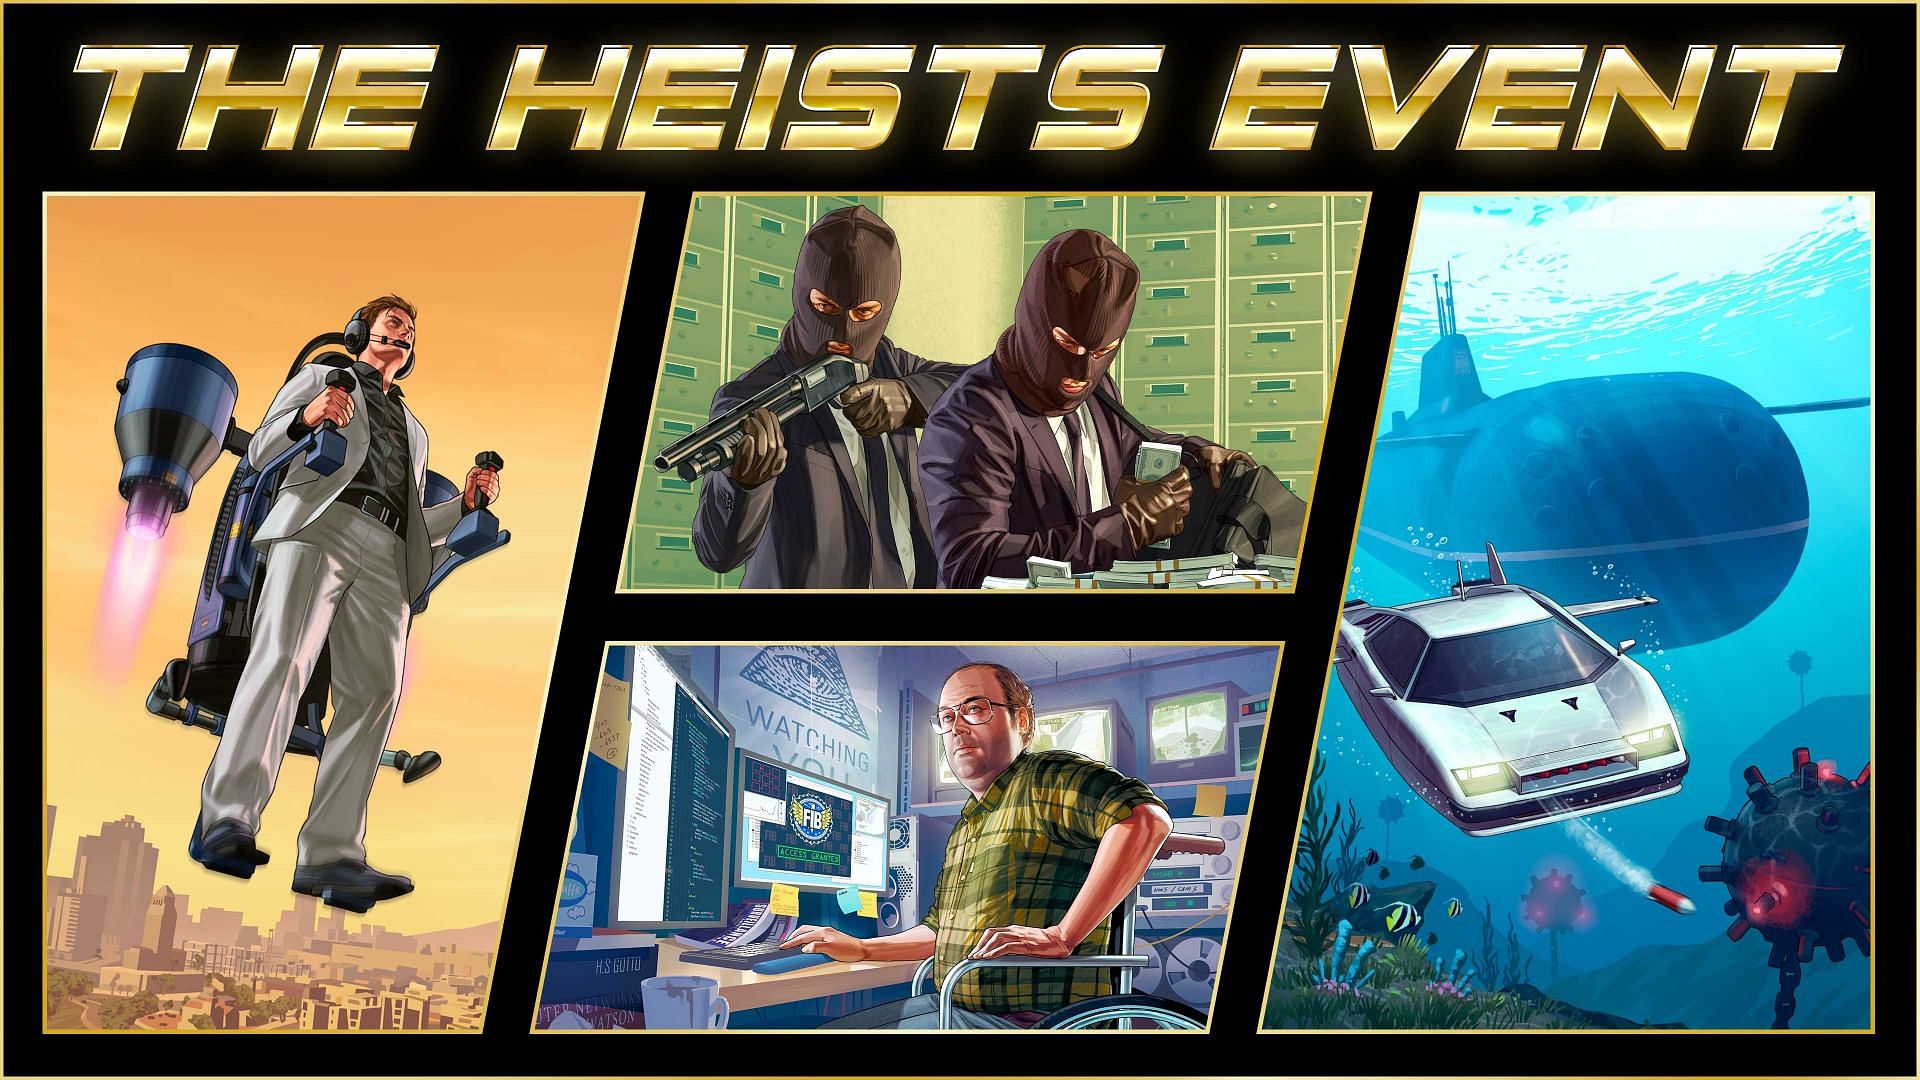 List of all Heists for GTA Online’s latest event